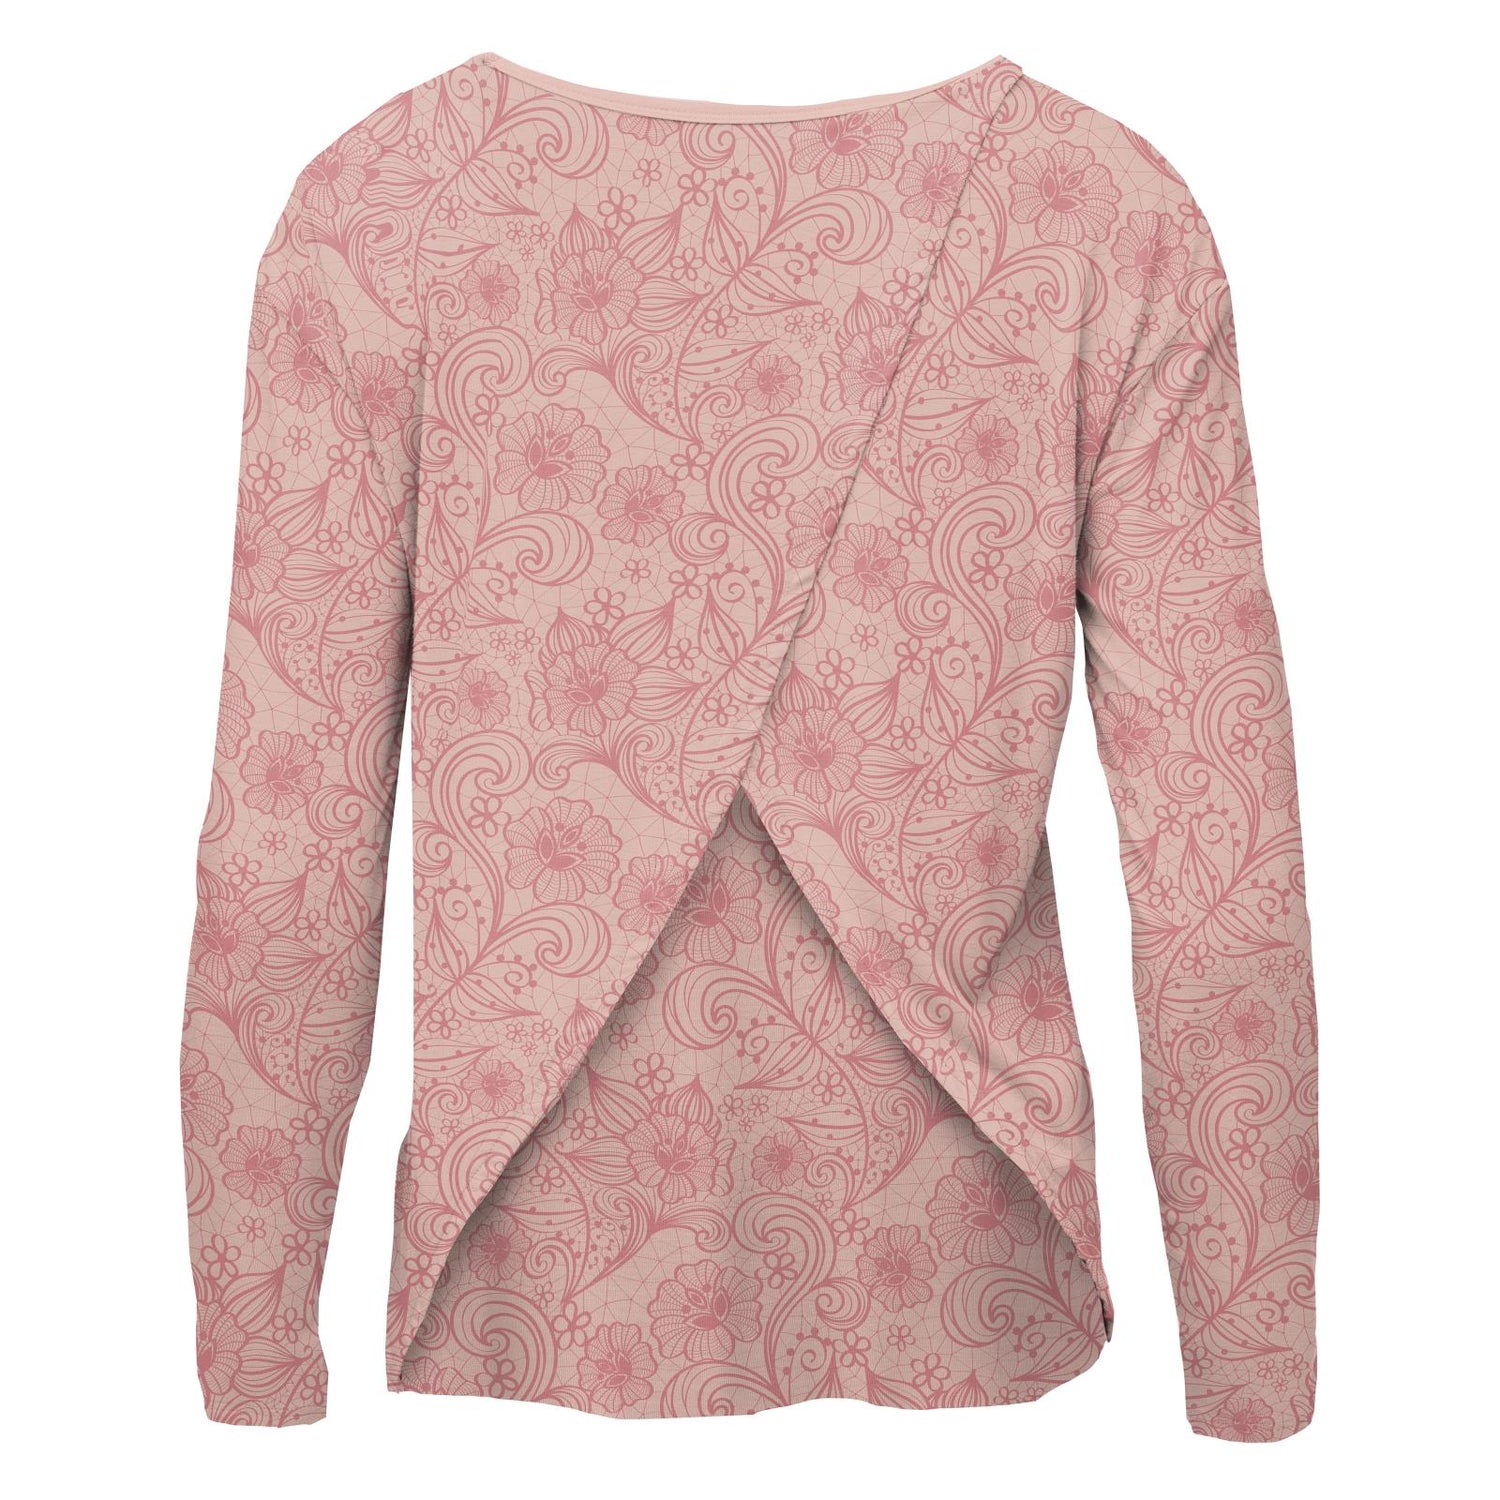 Women's Print Long Sleeve Butterfly Open-Back Top in Peach Blossom Lace